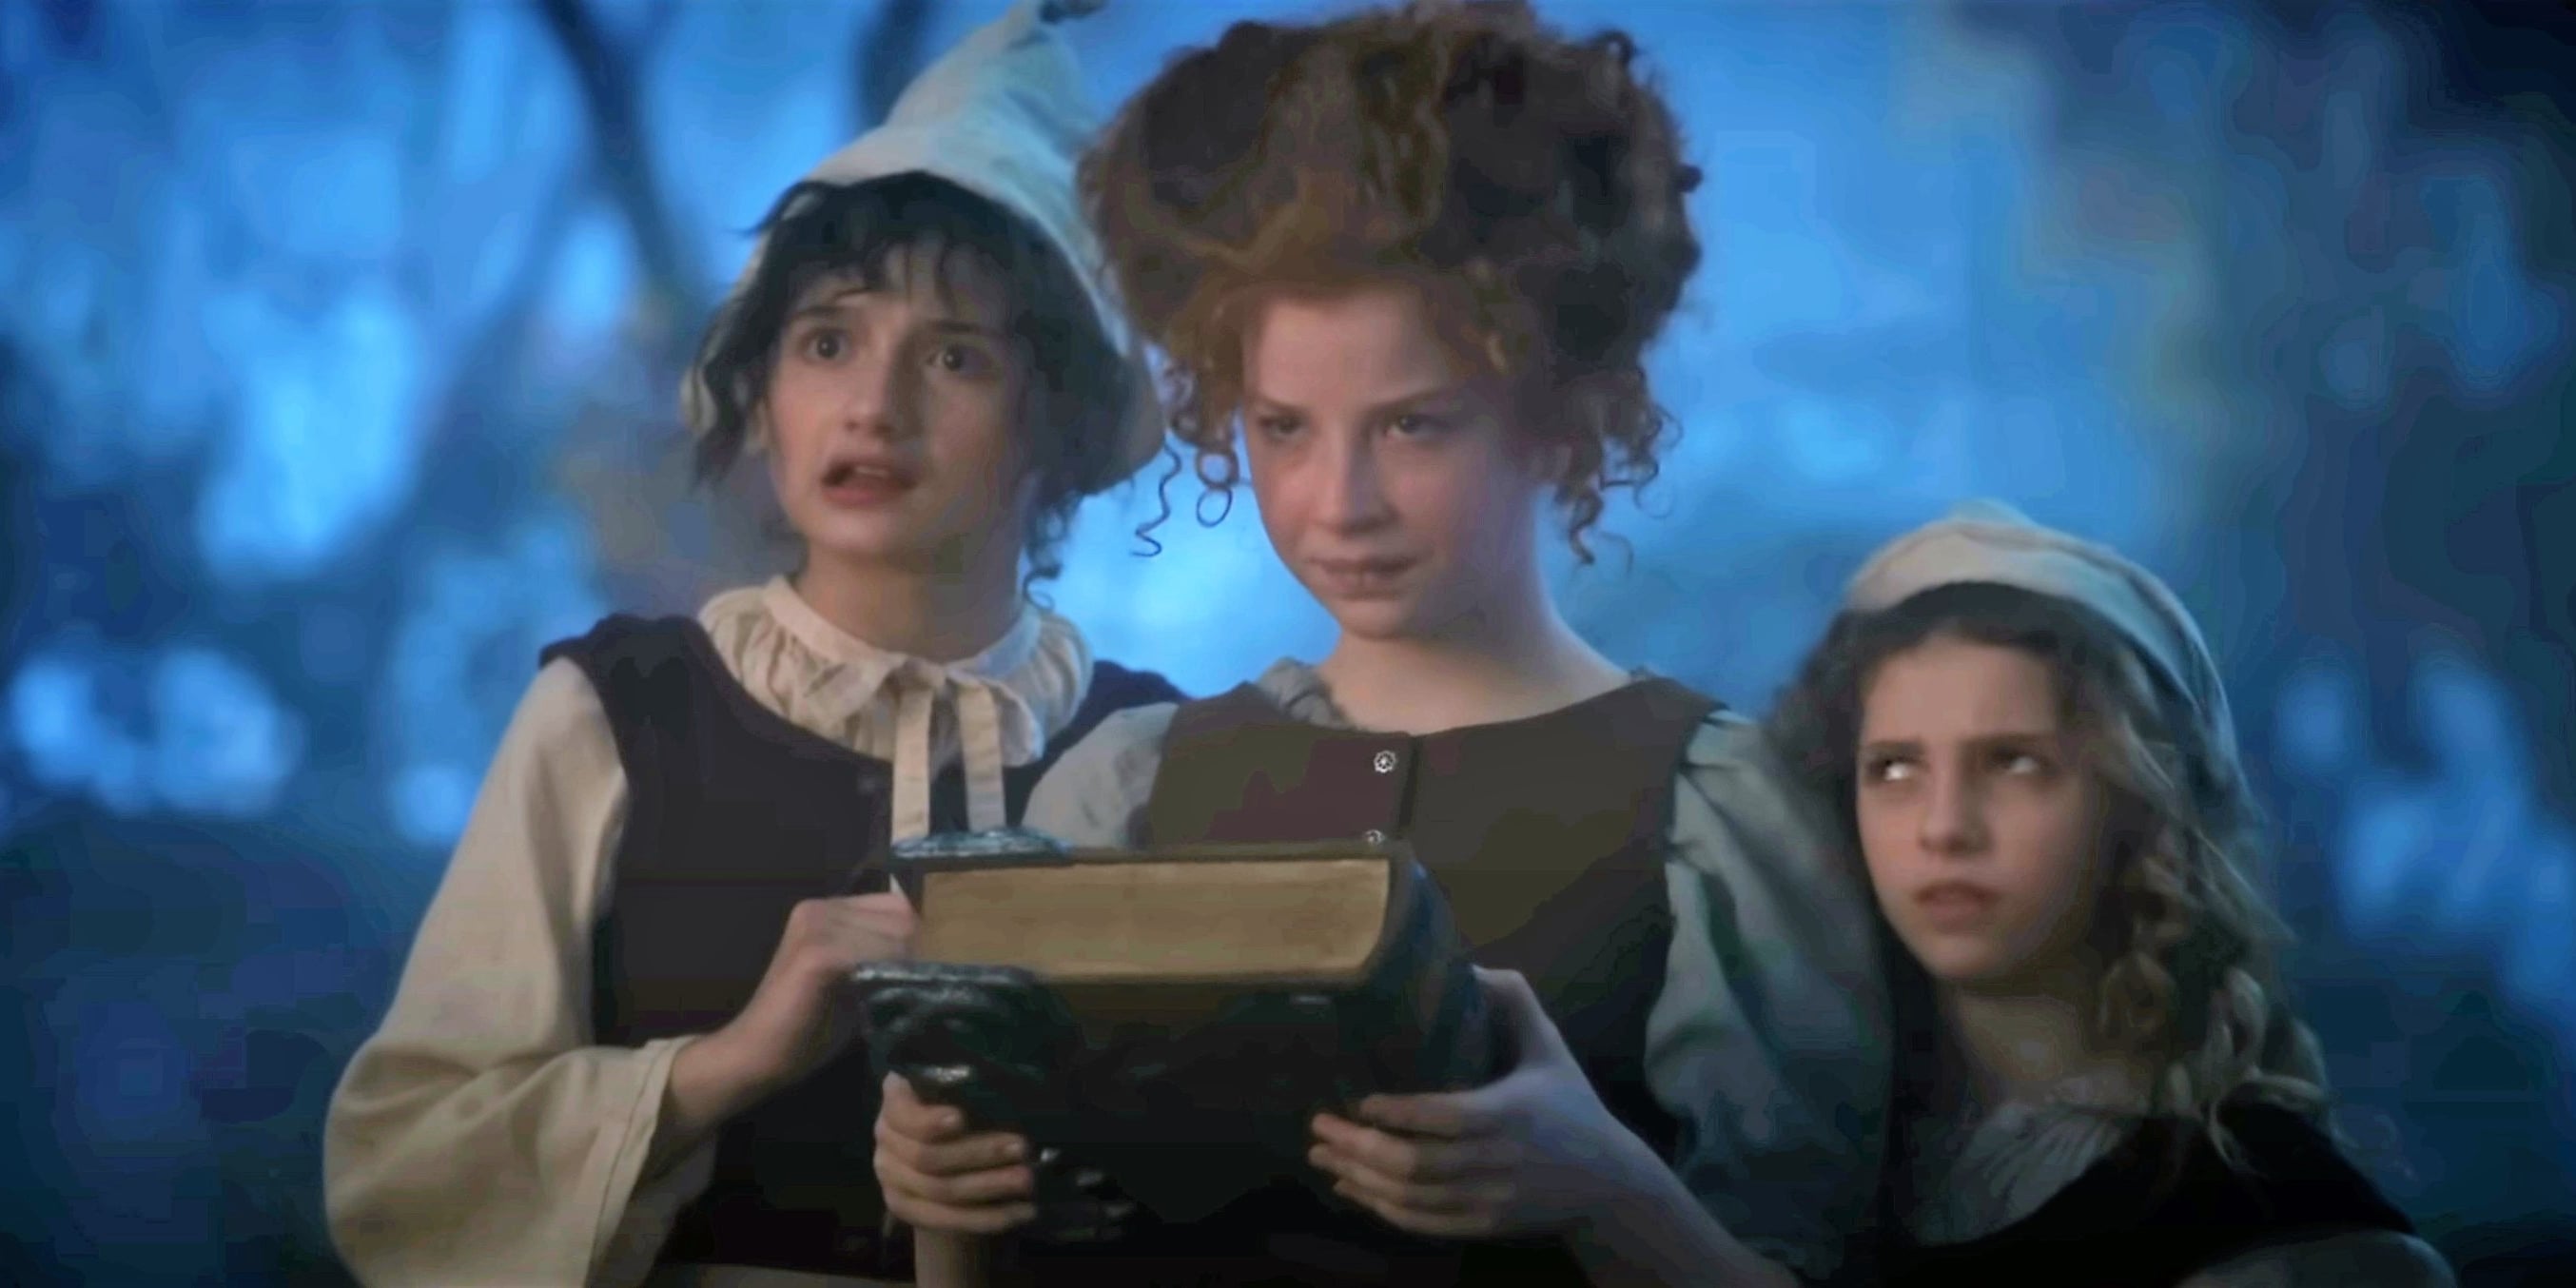 Hocus Pocus 2: Who Play the Young Sanderson Sisters?